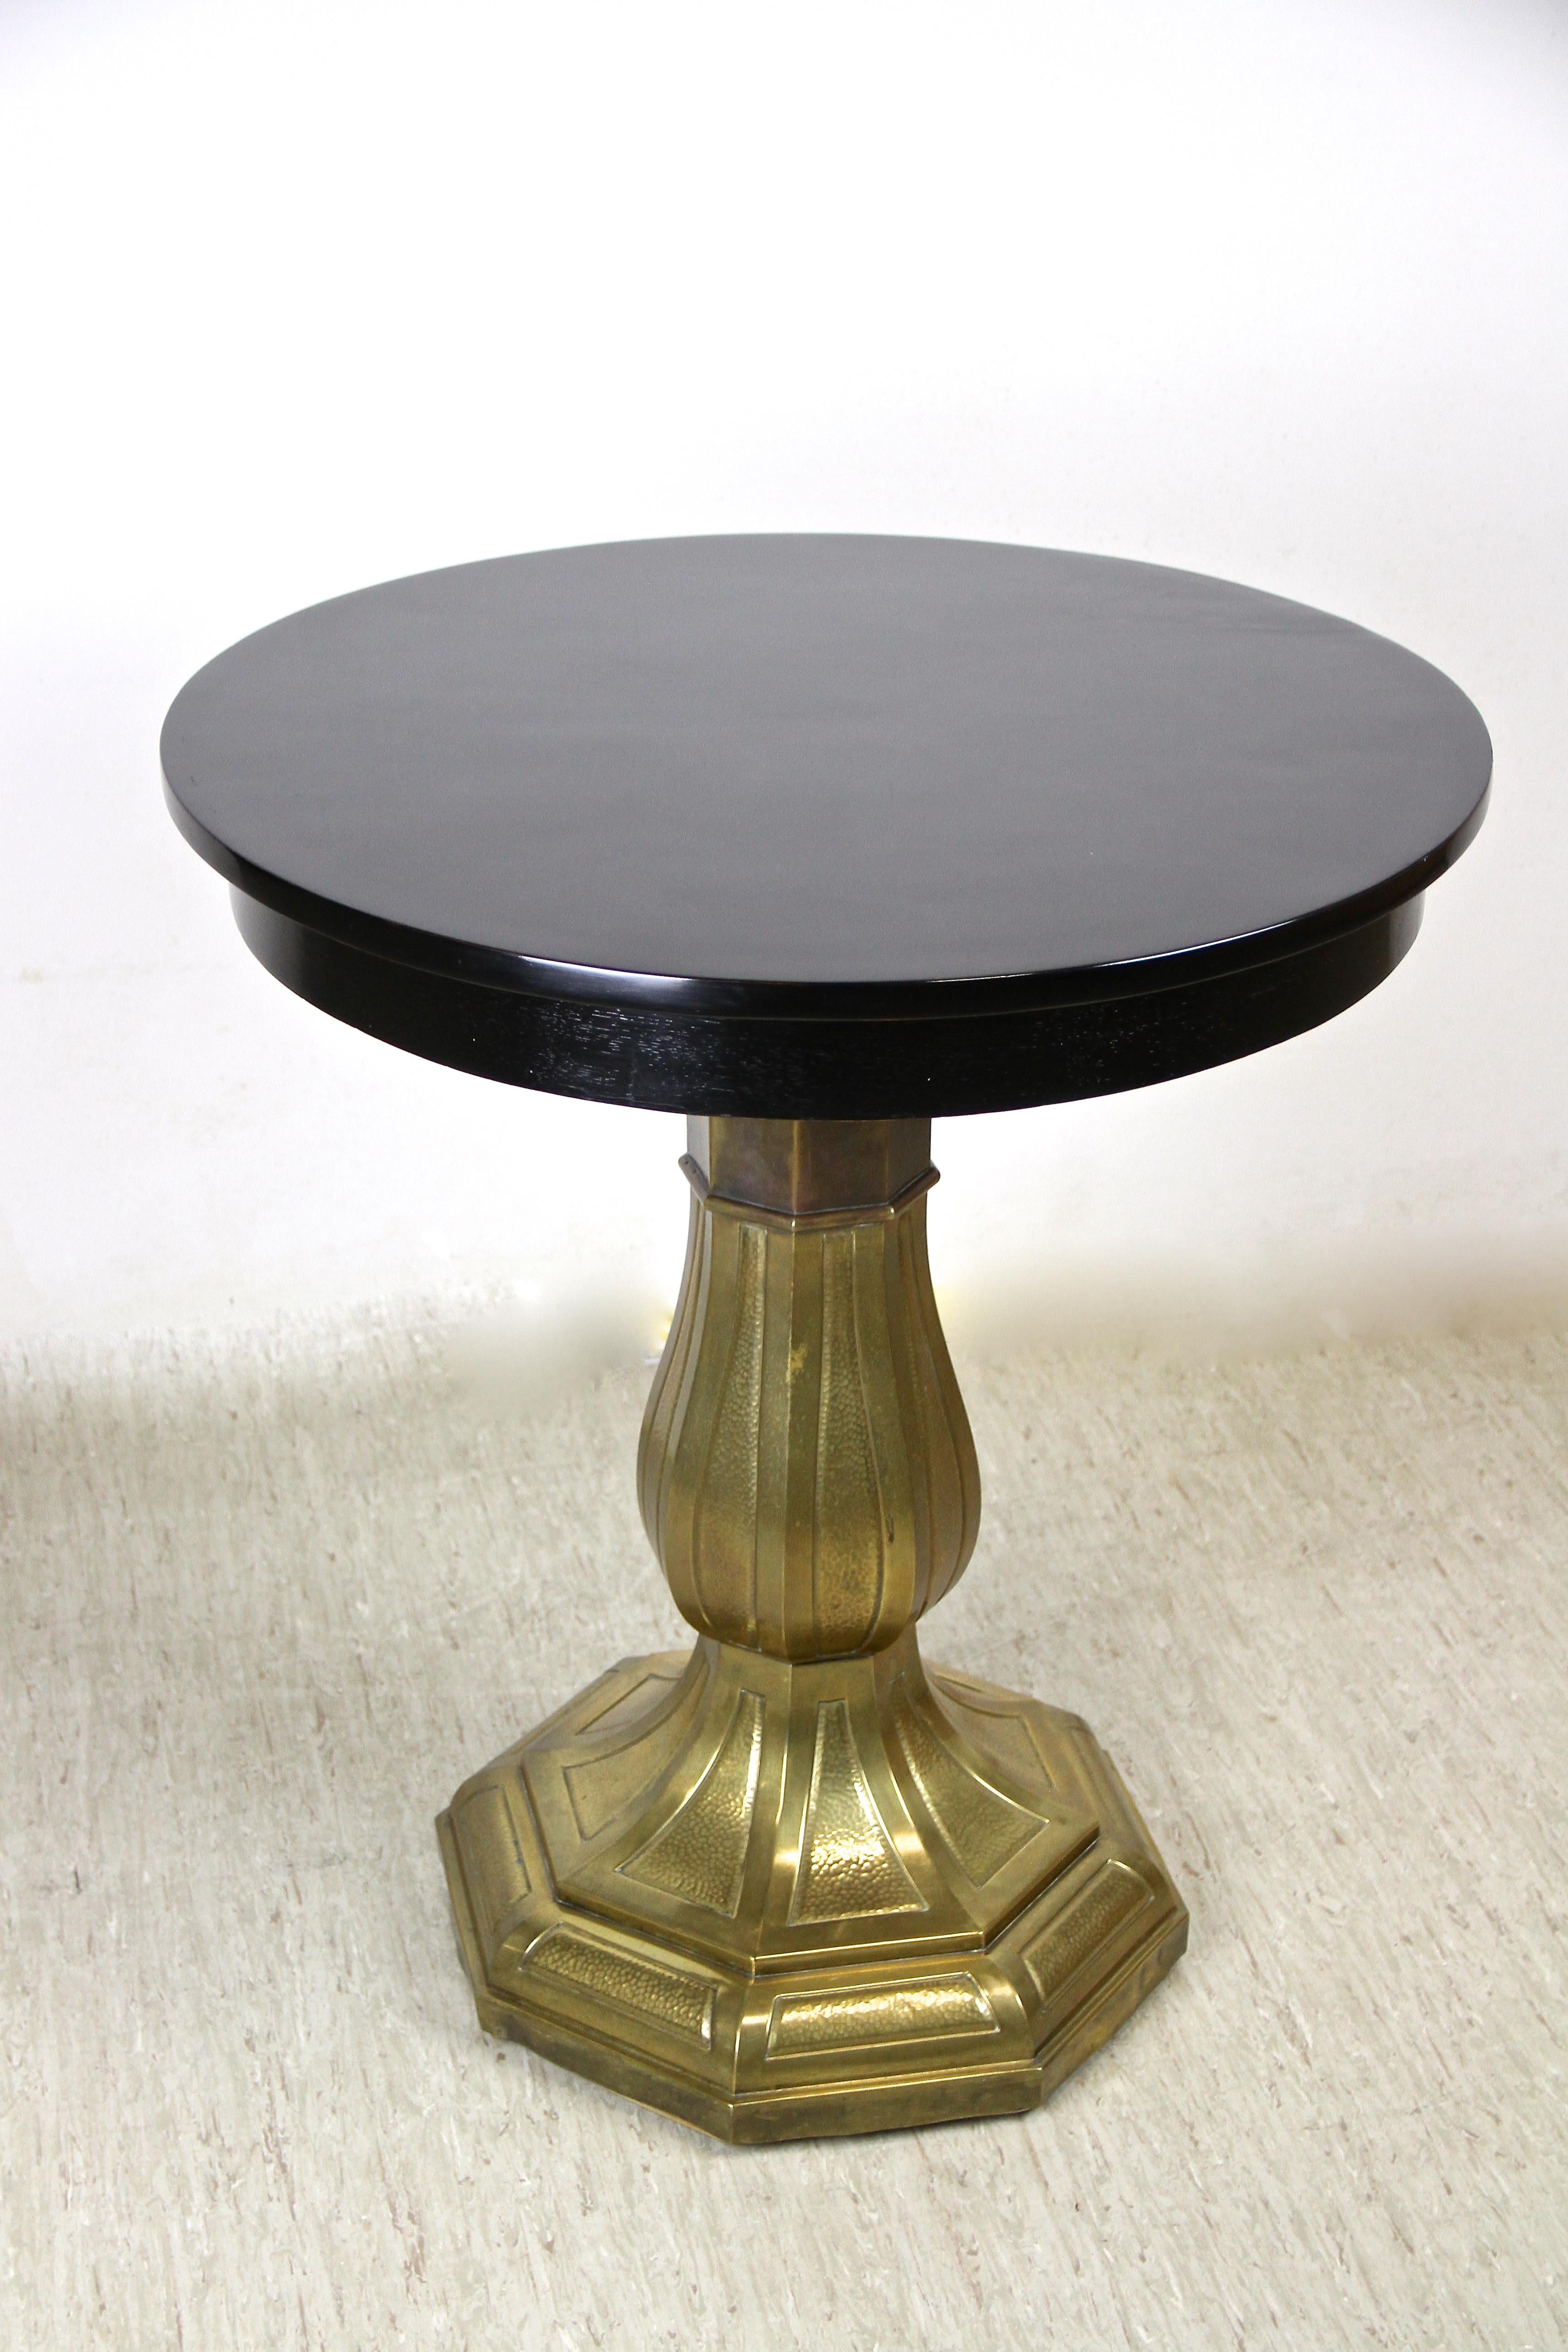 Remarkable black lacquered Art Nouveau coffee/ side table out of Vienna/ Austria from the period circa 1910. The glossy round tabletop sits on an artfully shaped column with an octagonal base. A brass/ copper coated masterpiece impresses with a